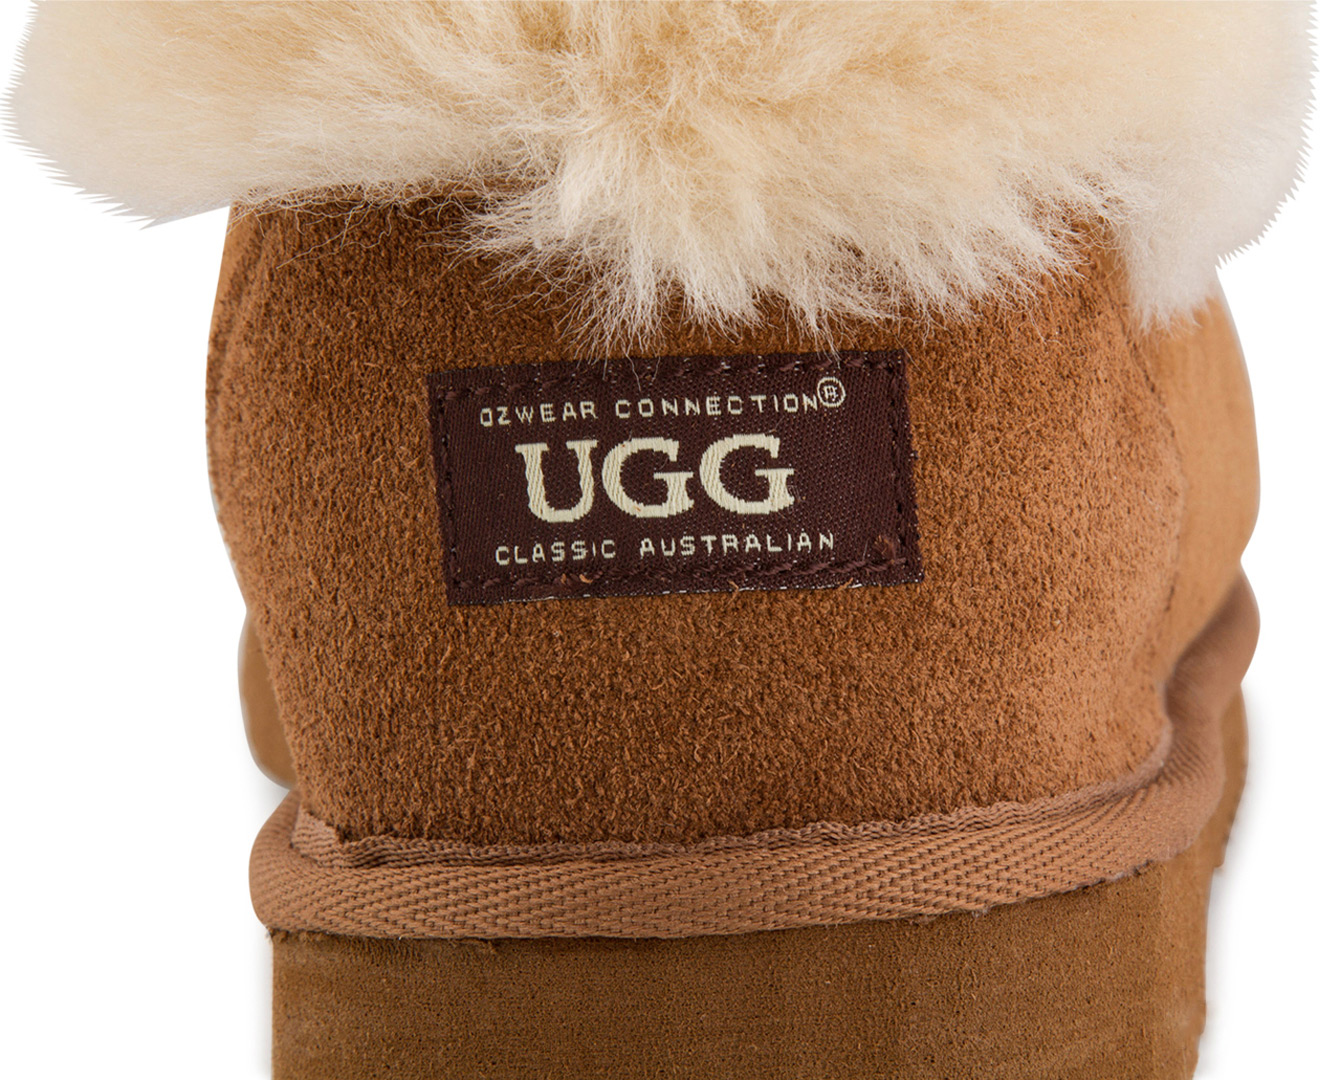 are ozwear uggs real